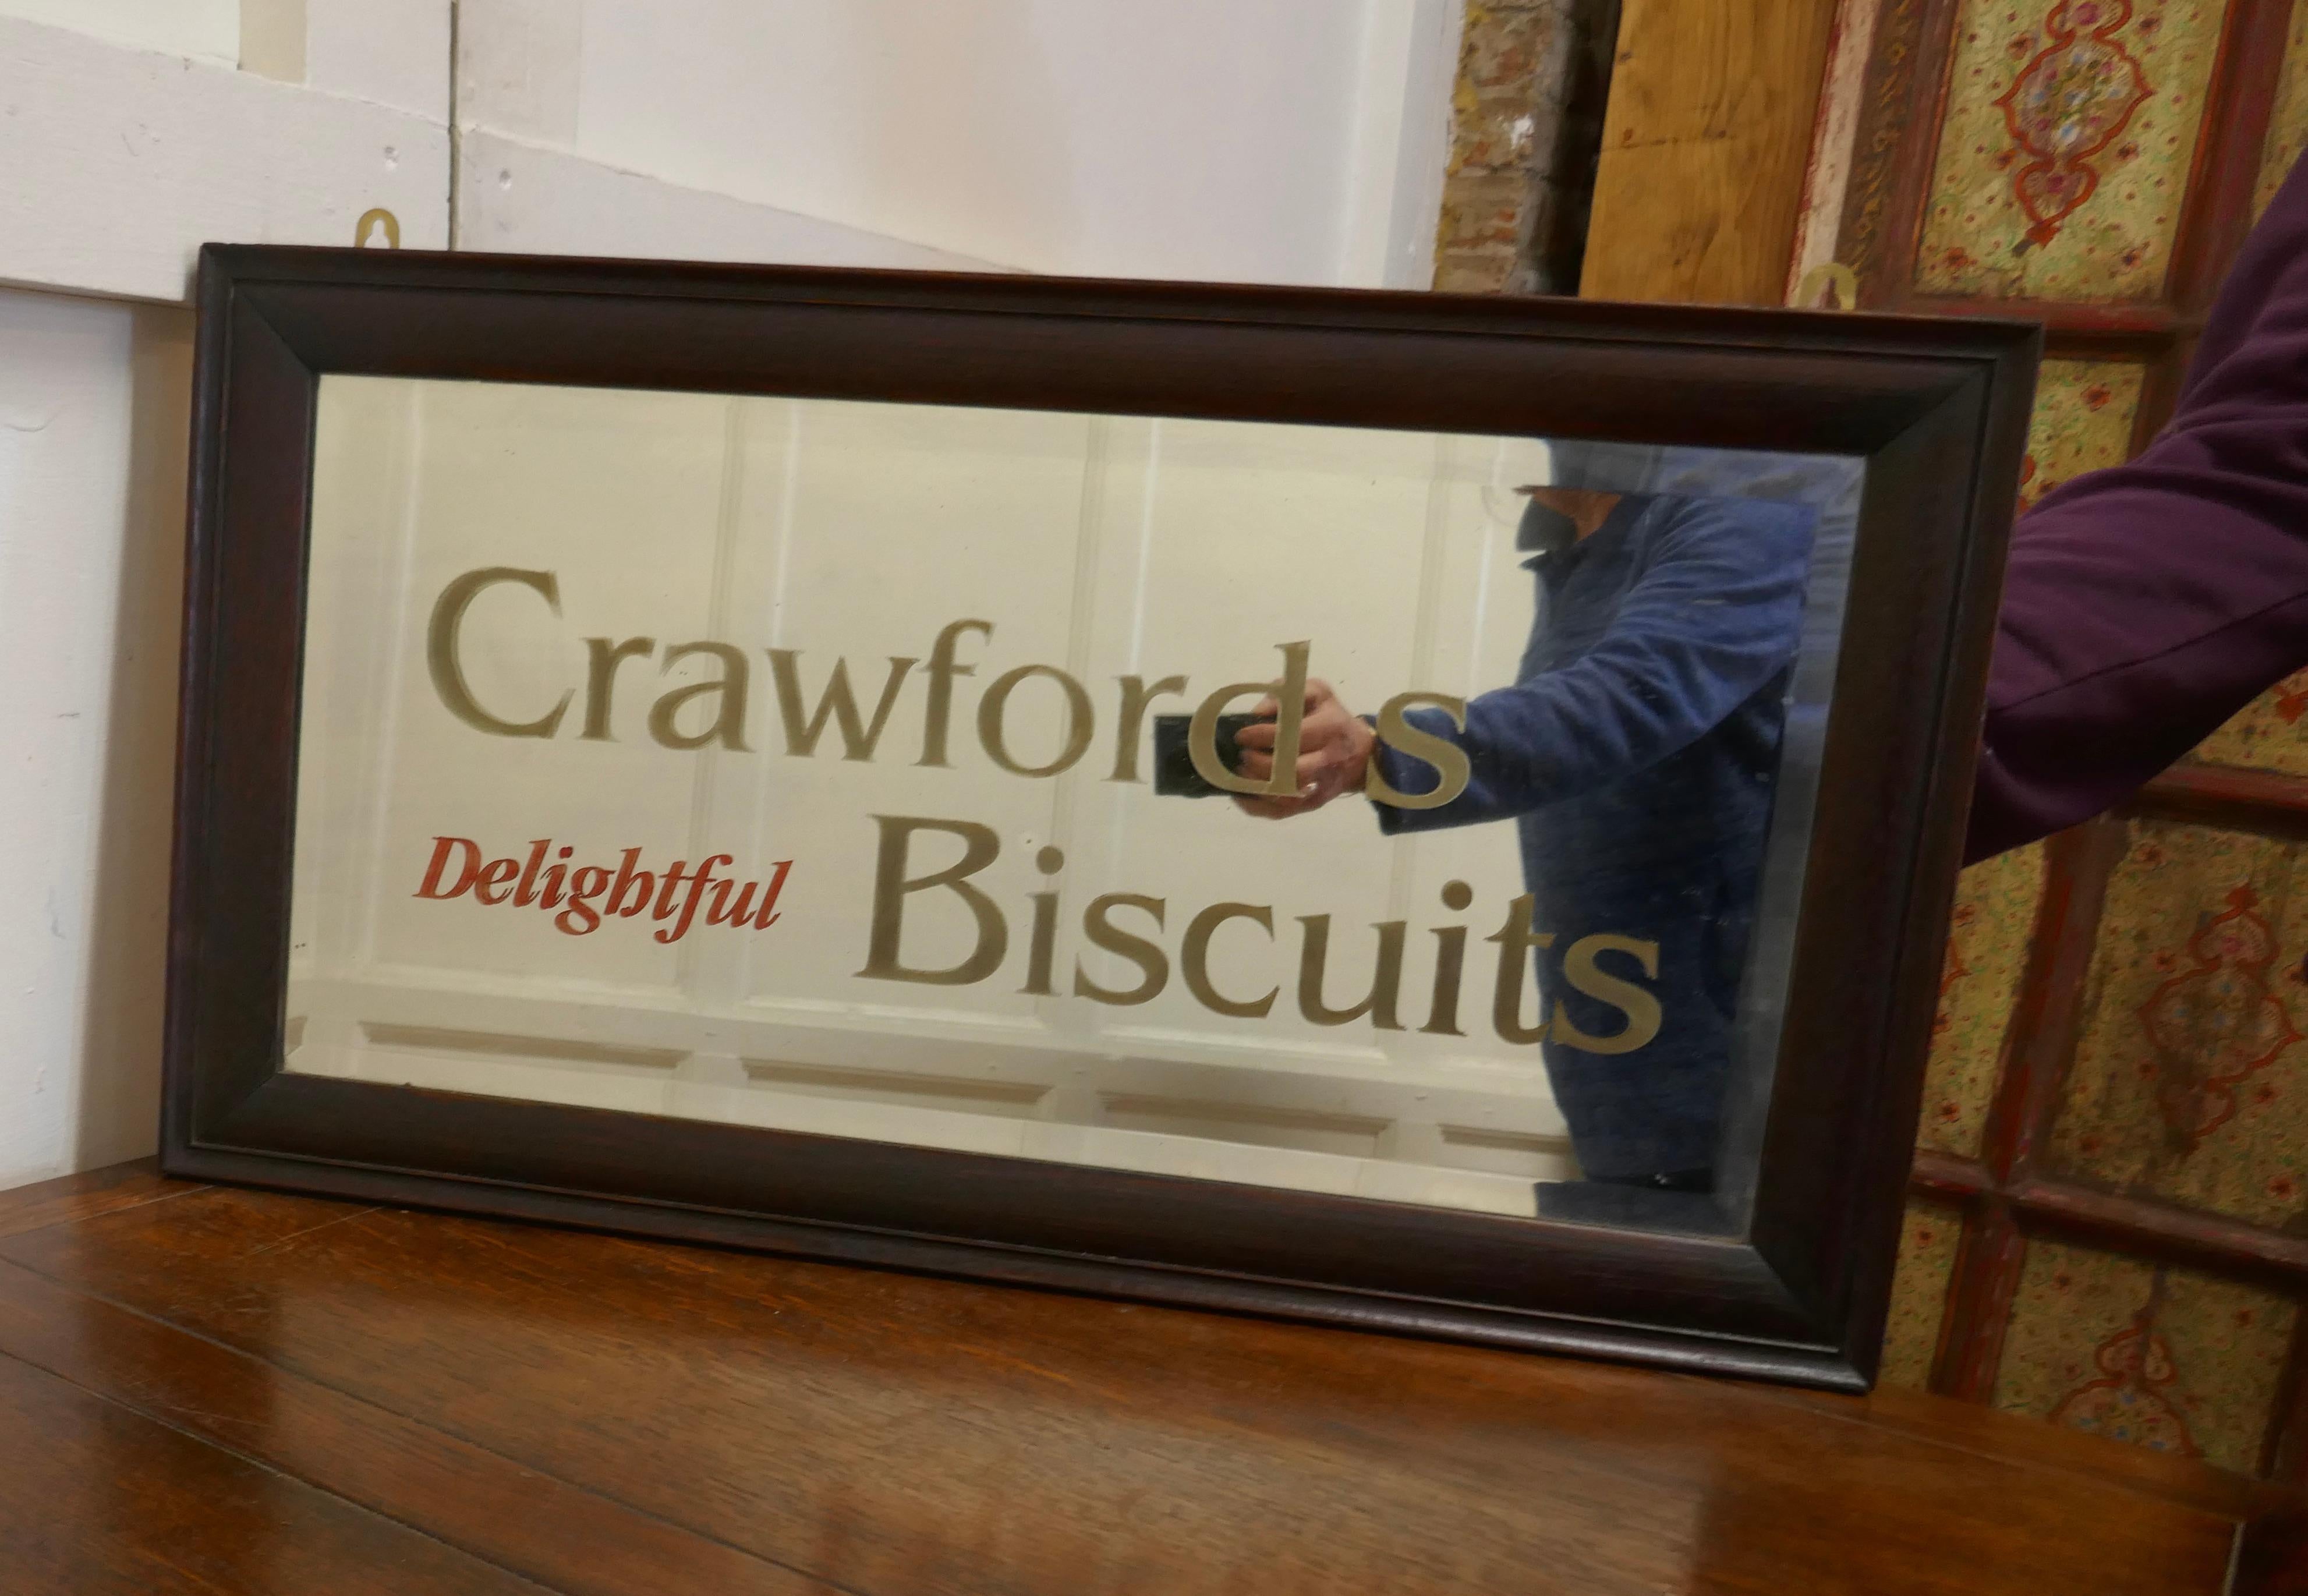 “Crawford’s Delightful Biscuits” baker/cafe advertising mirror.

This is a good piece the bevelled mirror is set in a 2” wide oak frame, in the centre in large letters etched into the glass it advertises Crawford’s Delightful Biscuits

This will